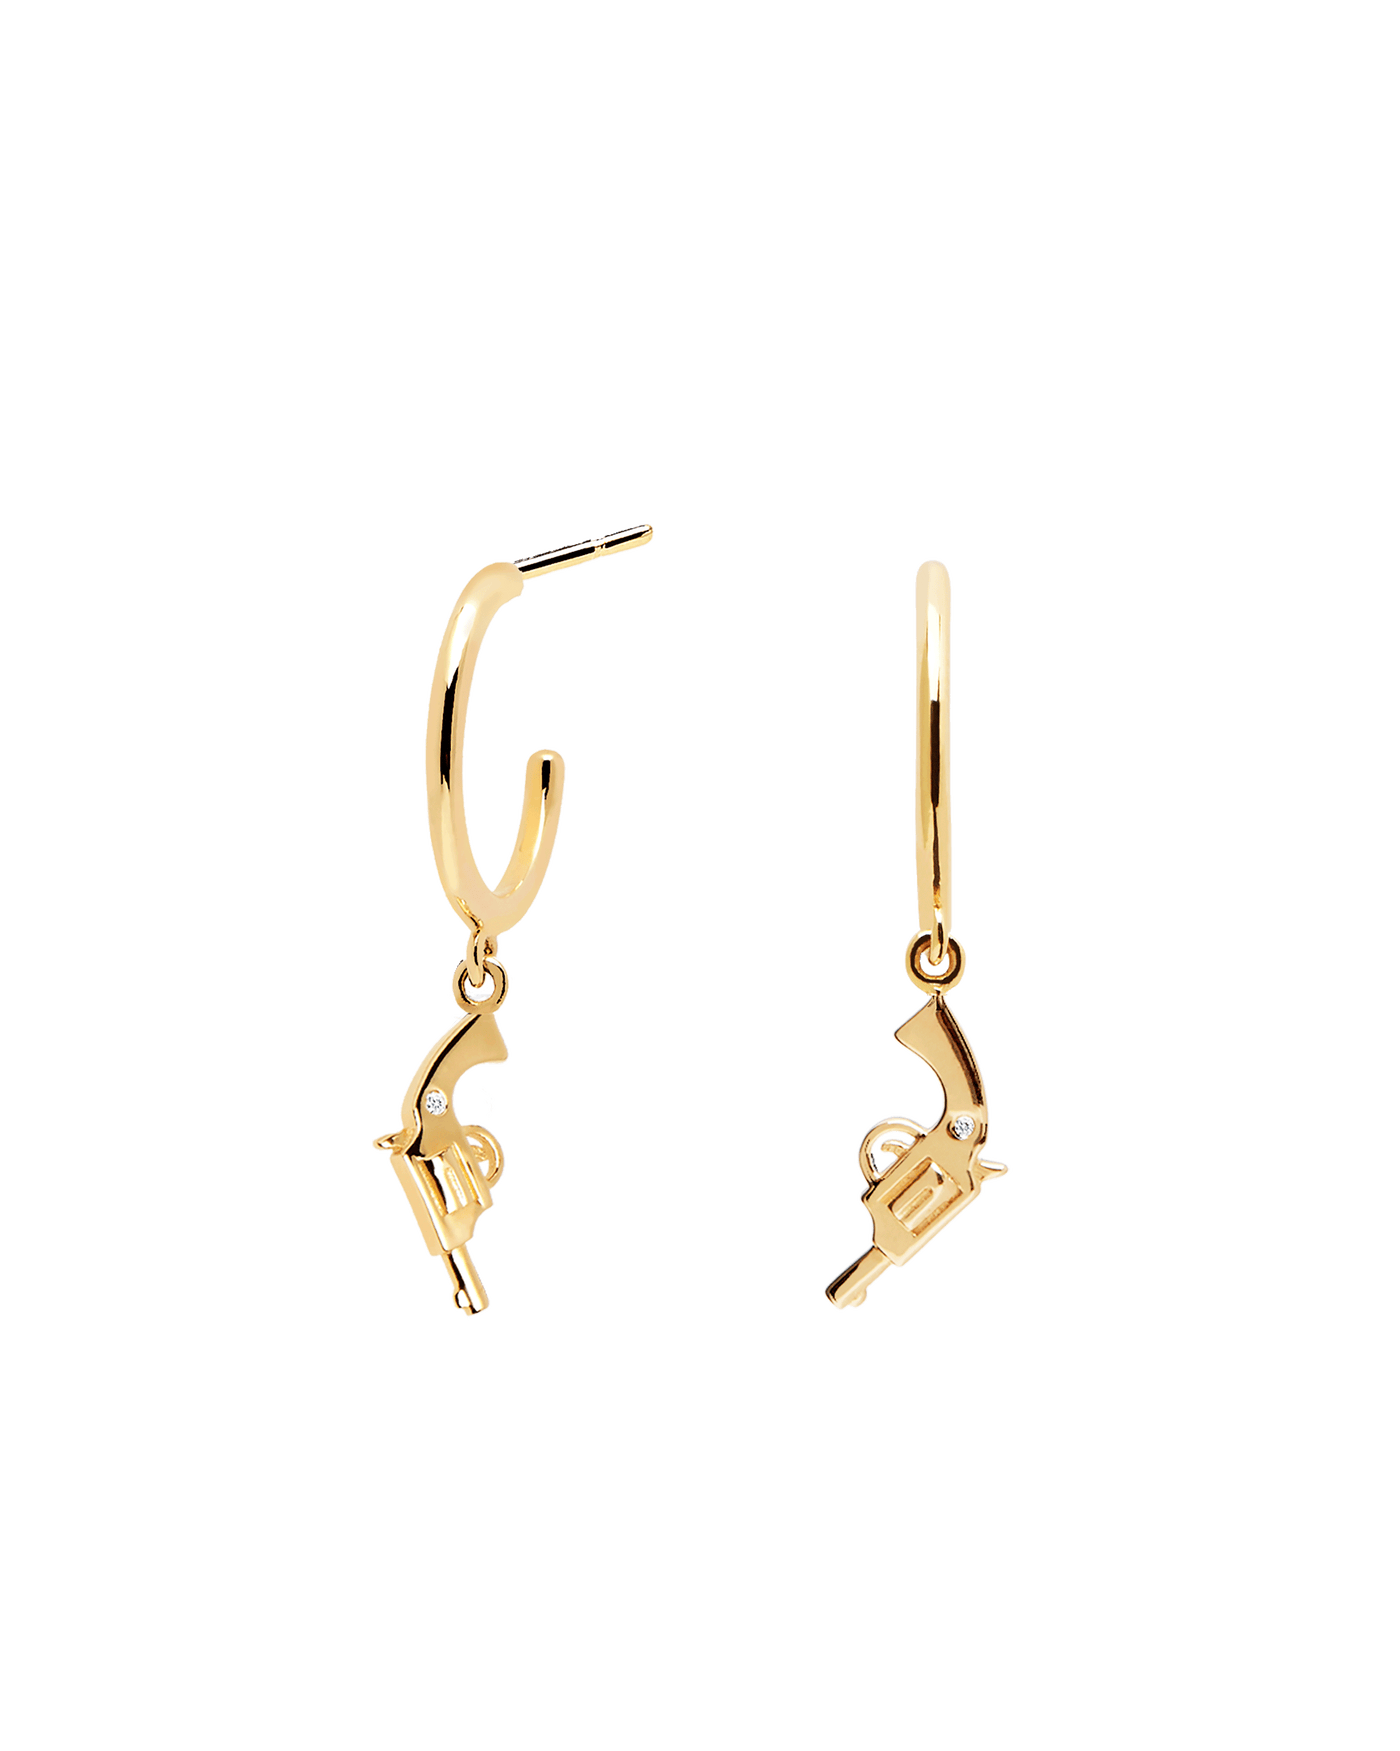 2021 Selection | Bang Bang gold earrings. Get the latest arrival from PDPAOLA. Place your order safely and get this Best Seller. Free Shipping over 70€